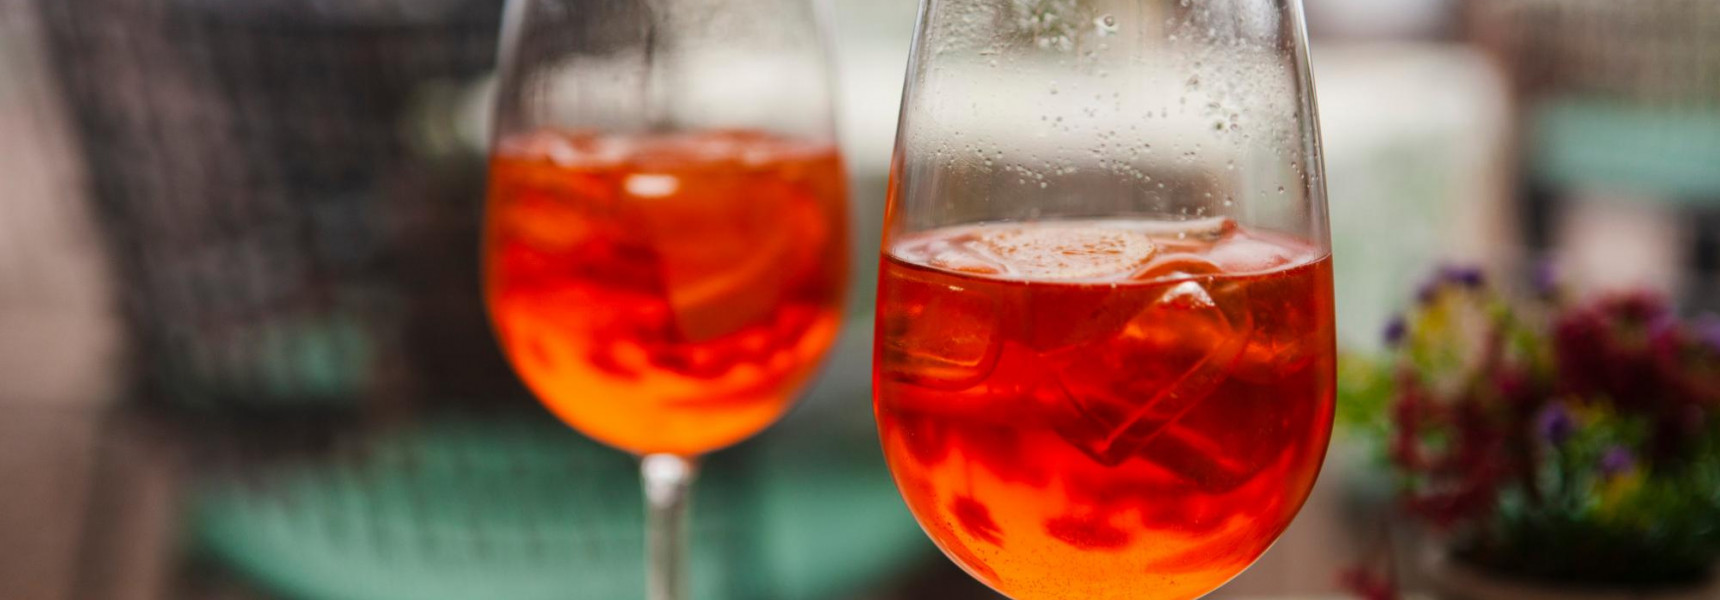 Top 5 Alternative Drink Experiences in Rome